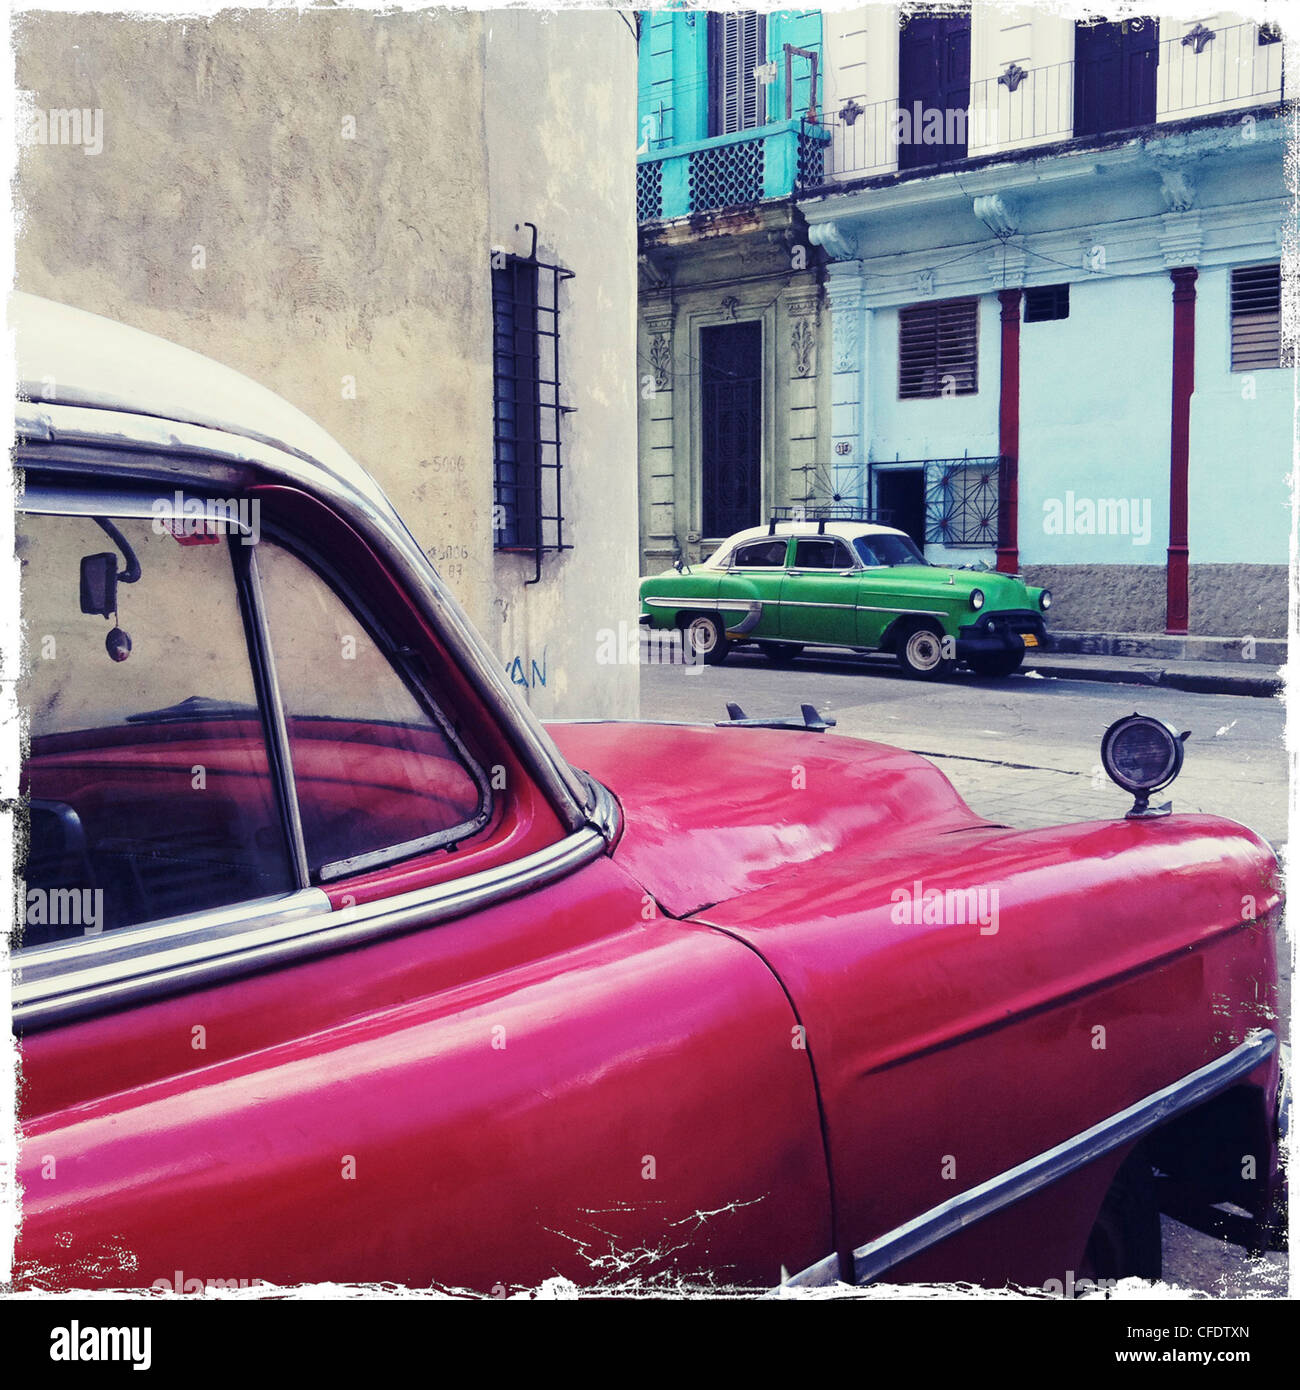 Street corner with red and green classic American cars, Havana Centro, Havana, Cuba, West Indies, Central America Stock Photo